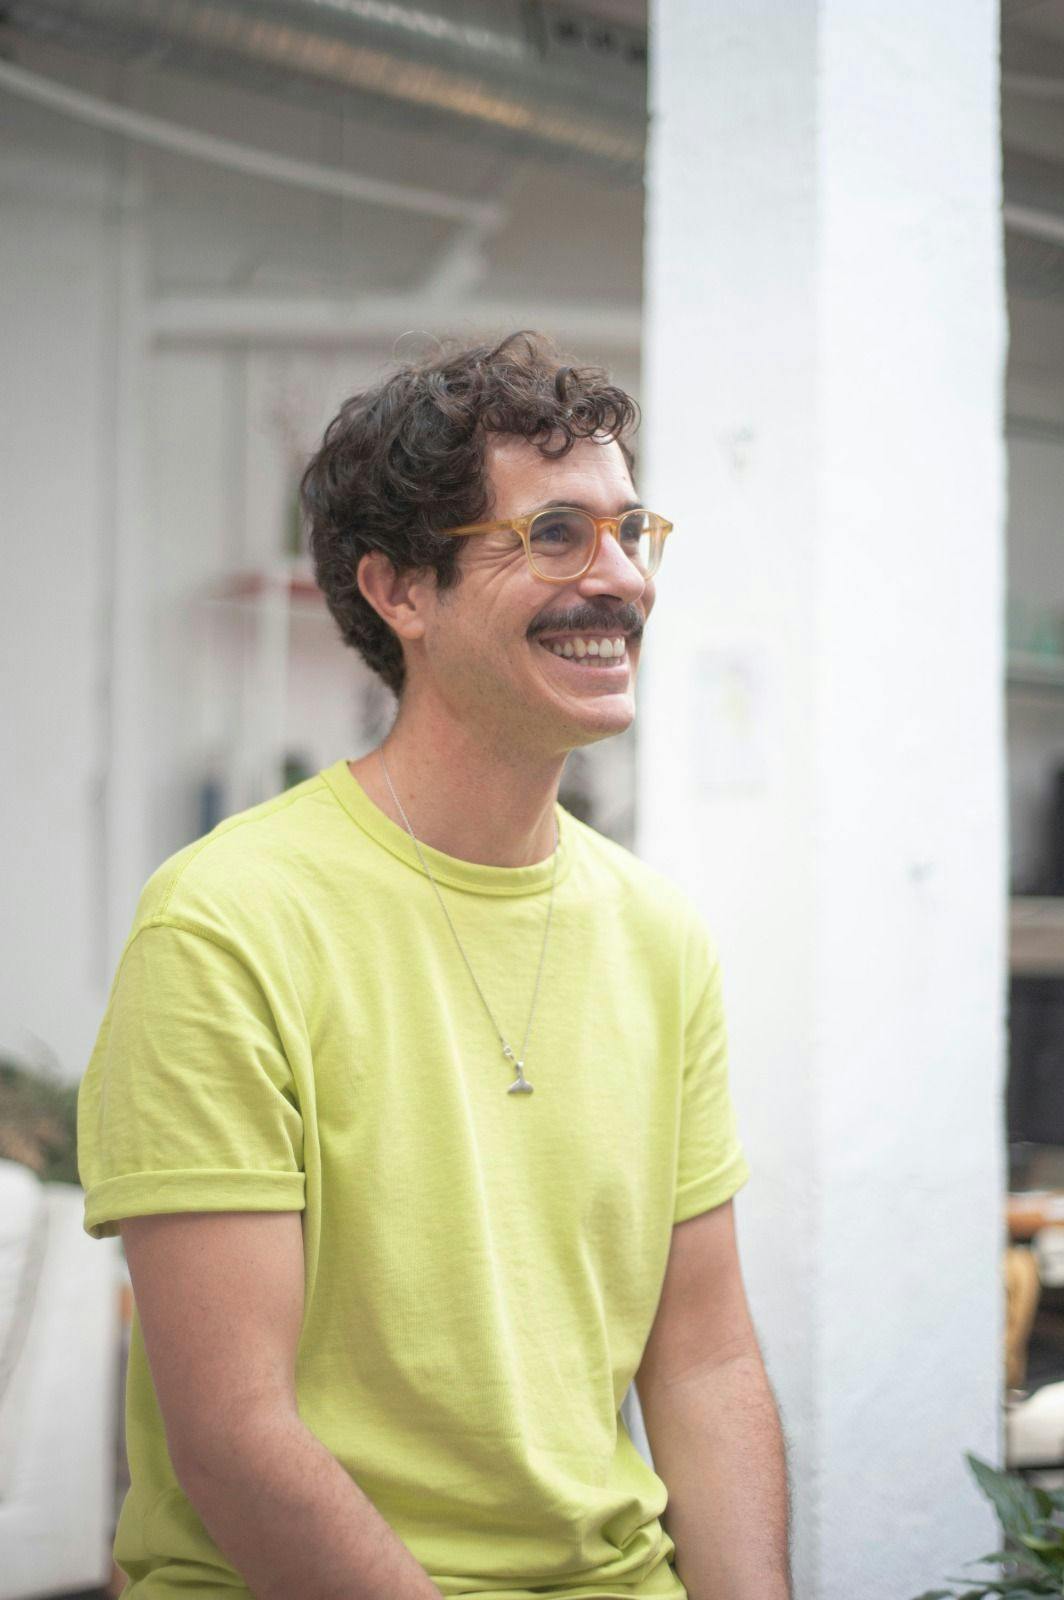 A man with light skin, curly brown hair, clear amber glasses, a mustache, and a pale lime green shirt sits in a bright, naturally lit room and looks off-camera, smiling.